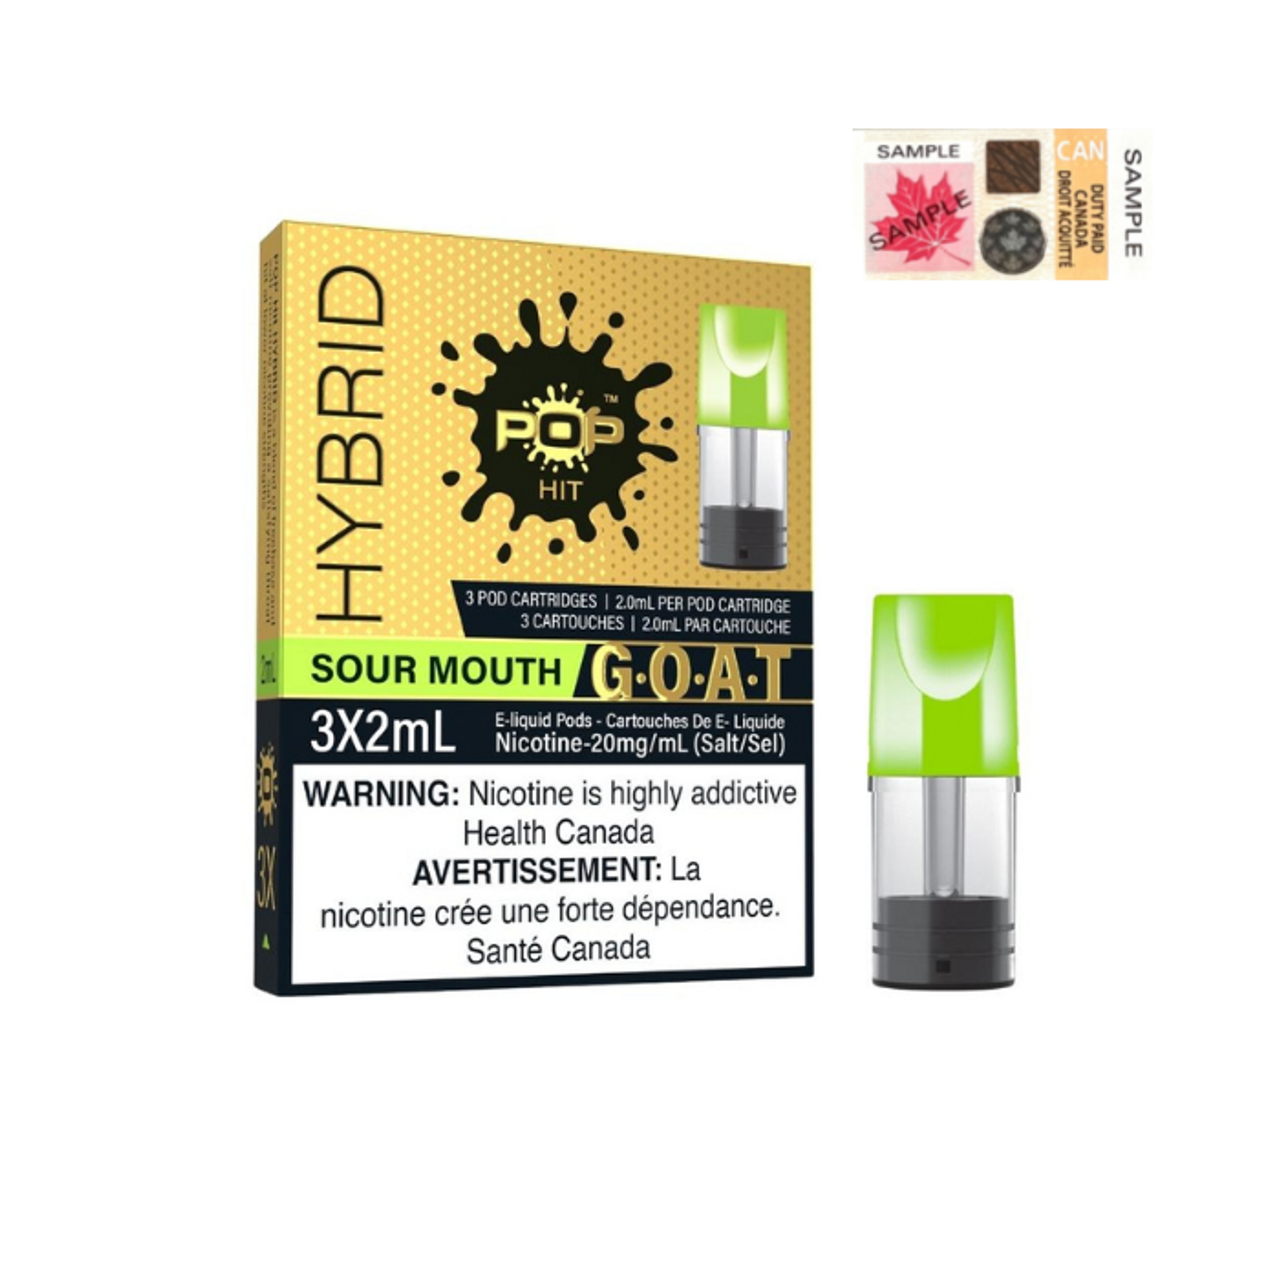 (Stamped) Sour Mouth Pop Hybrid G.O.A.T. Pods Ct 5